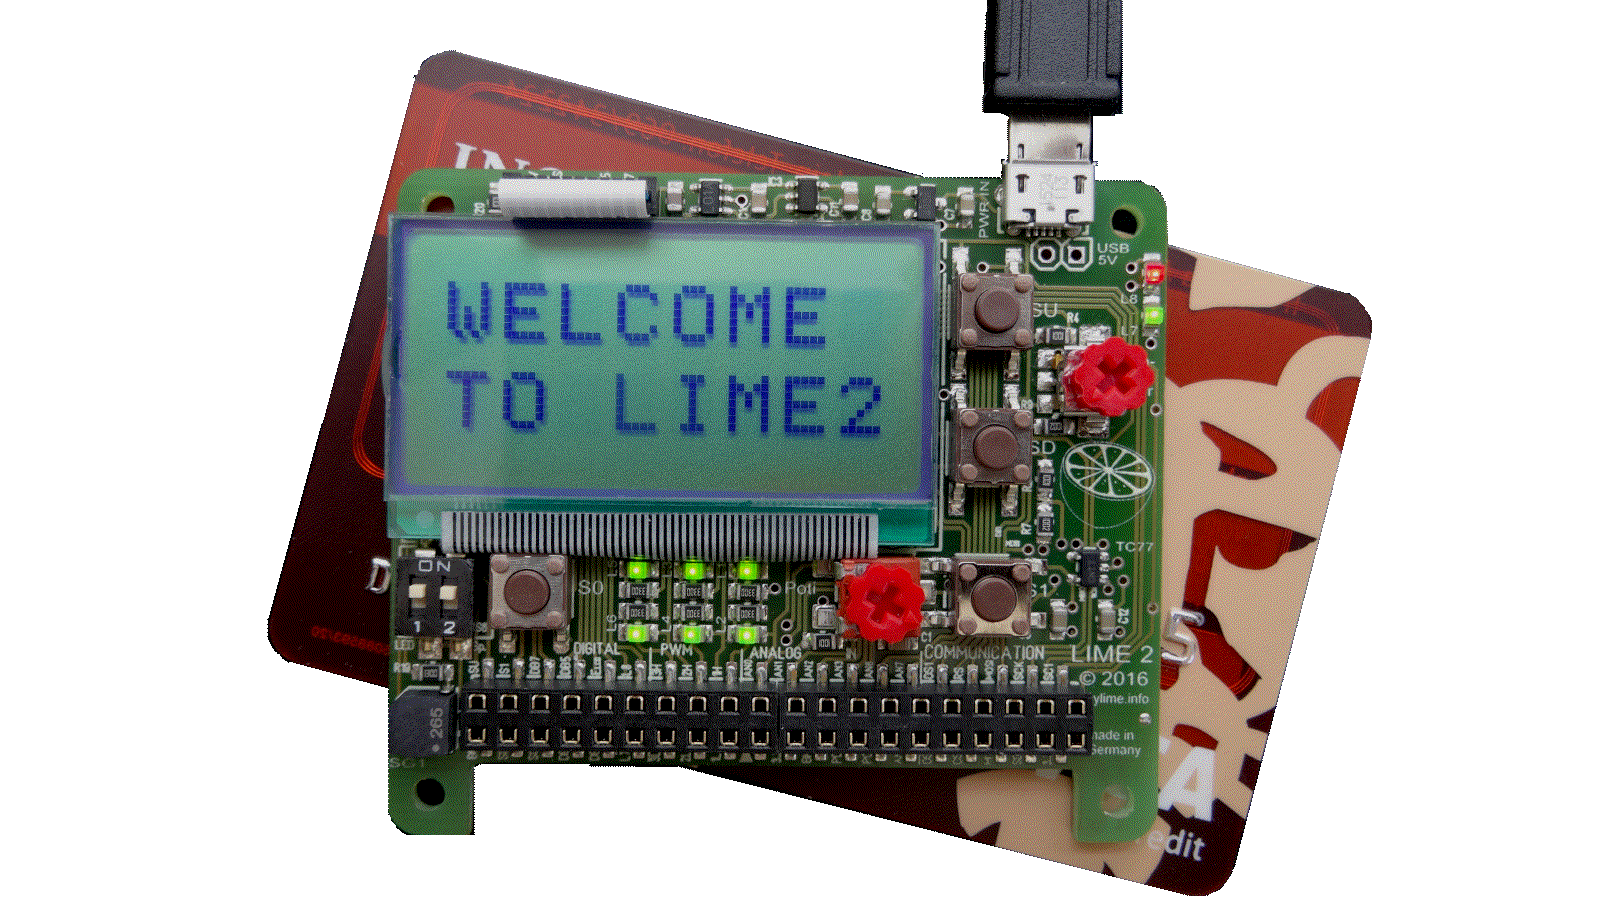 LIME2 Mikrocontrollerboard with credit card